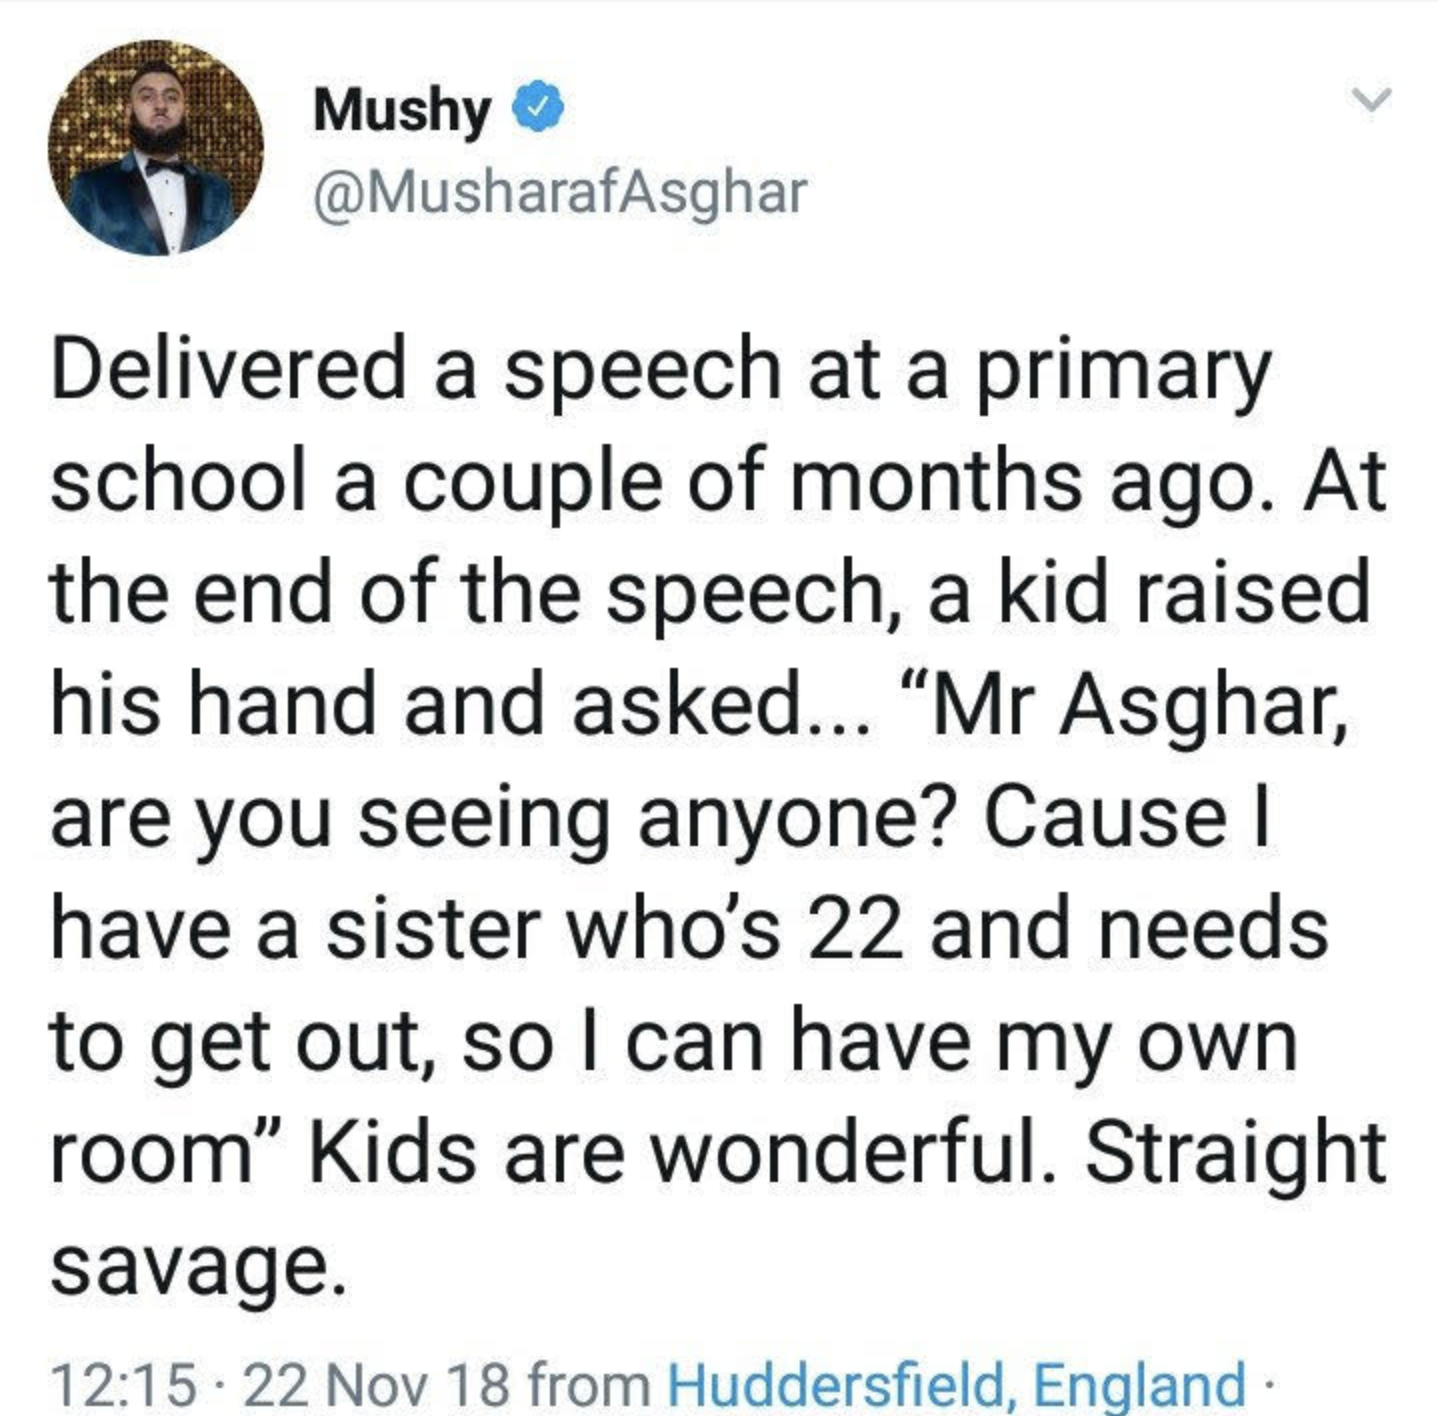 Instagram - Mushy Delivered a speech at a primary school a couple of months ago. At the end of the speech, a kid raised his hand and asked... "Mr Asghar, are you seeing anyone? Cause I have a sister who's 22 and needs to get out, so I can have my own room